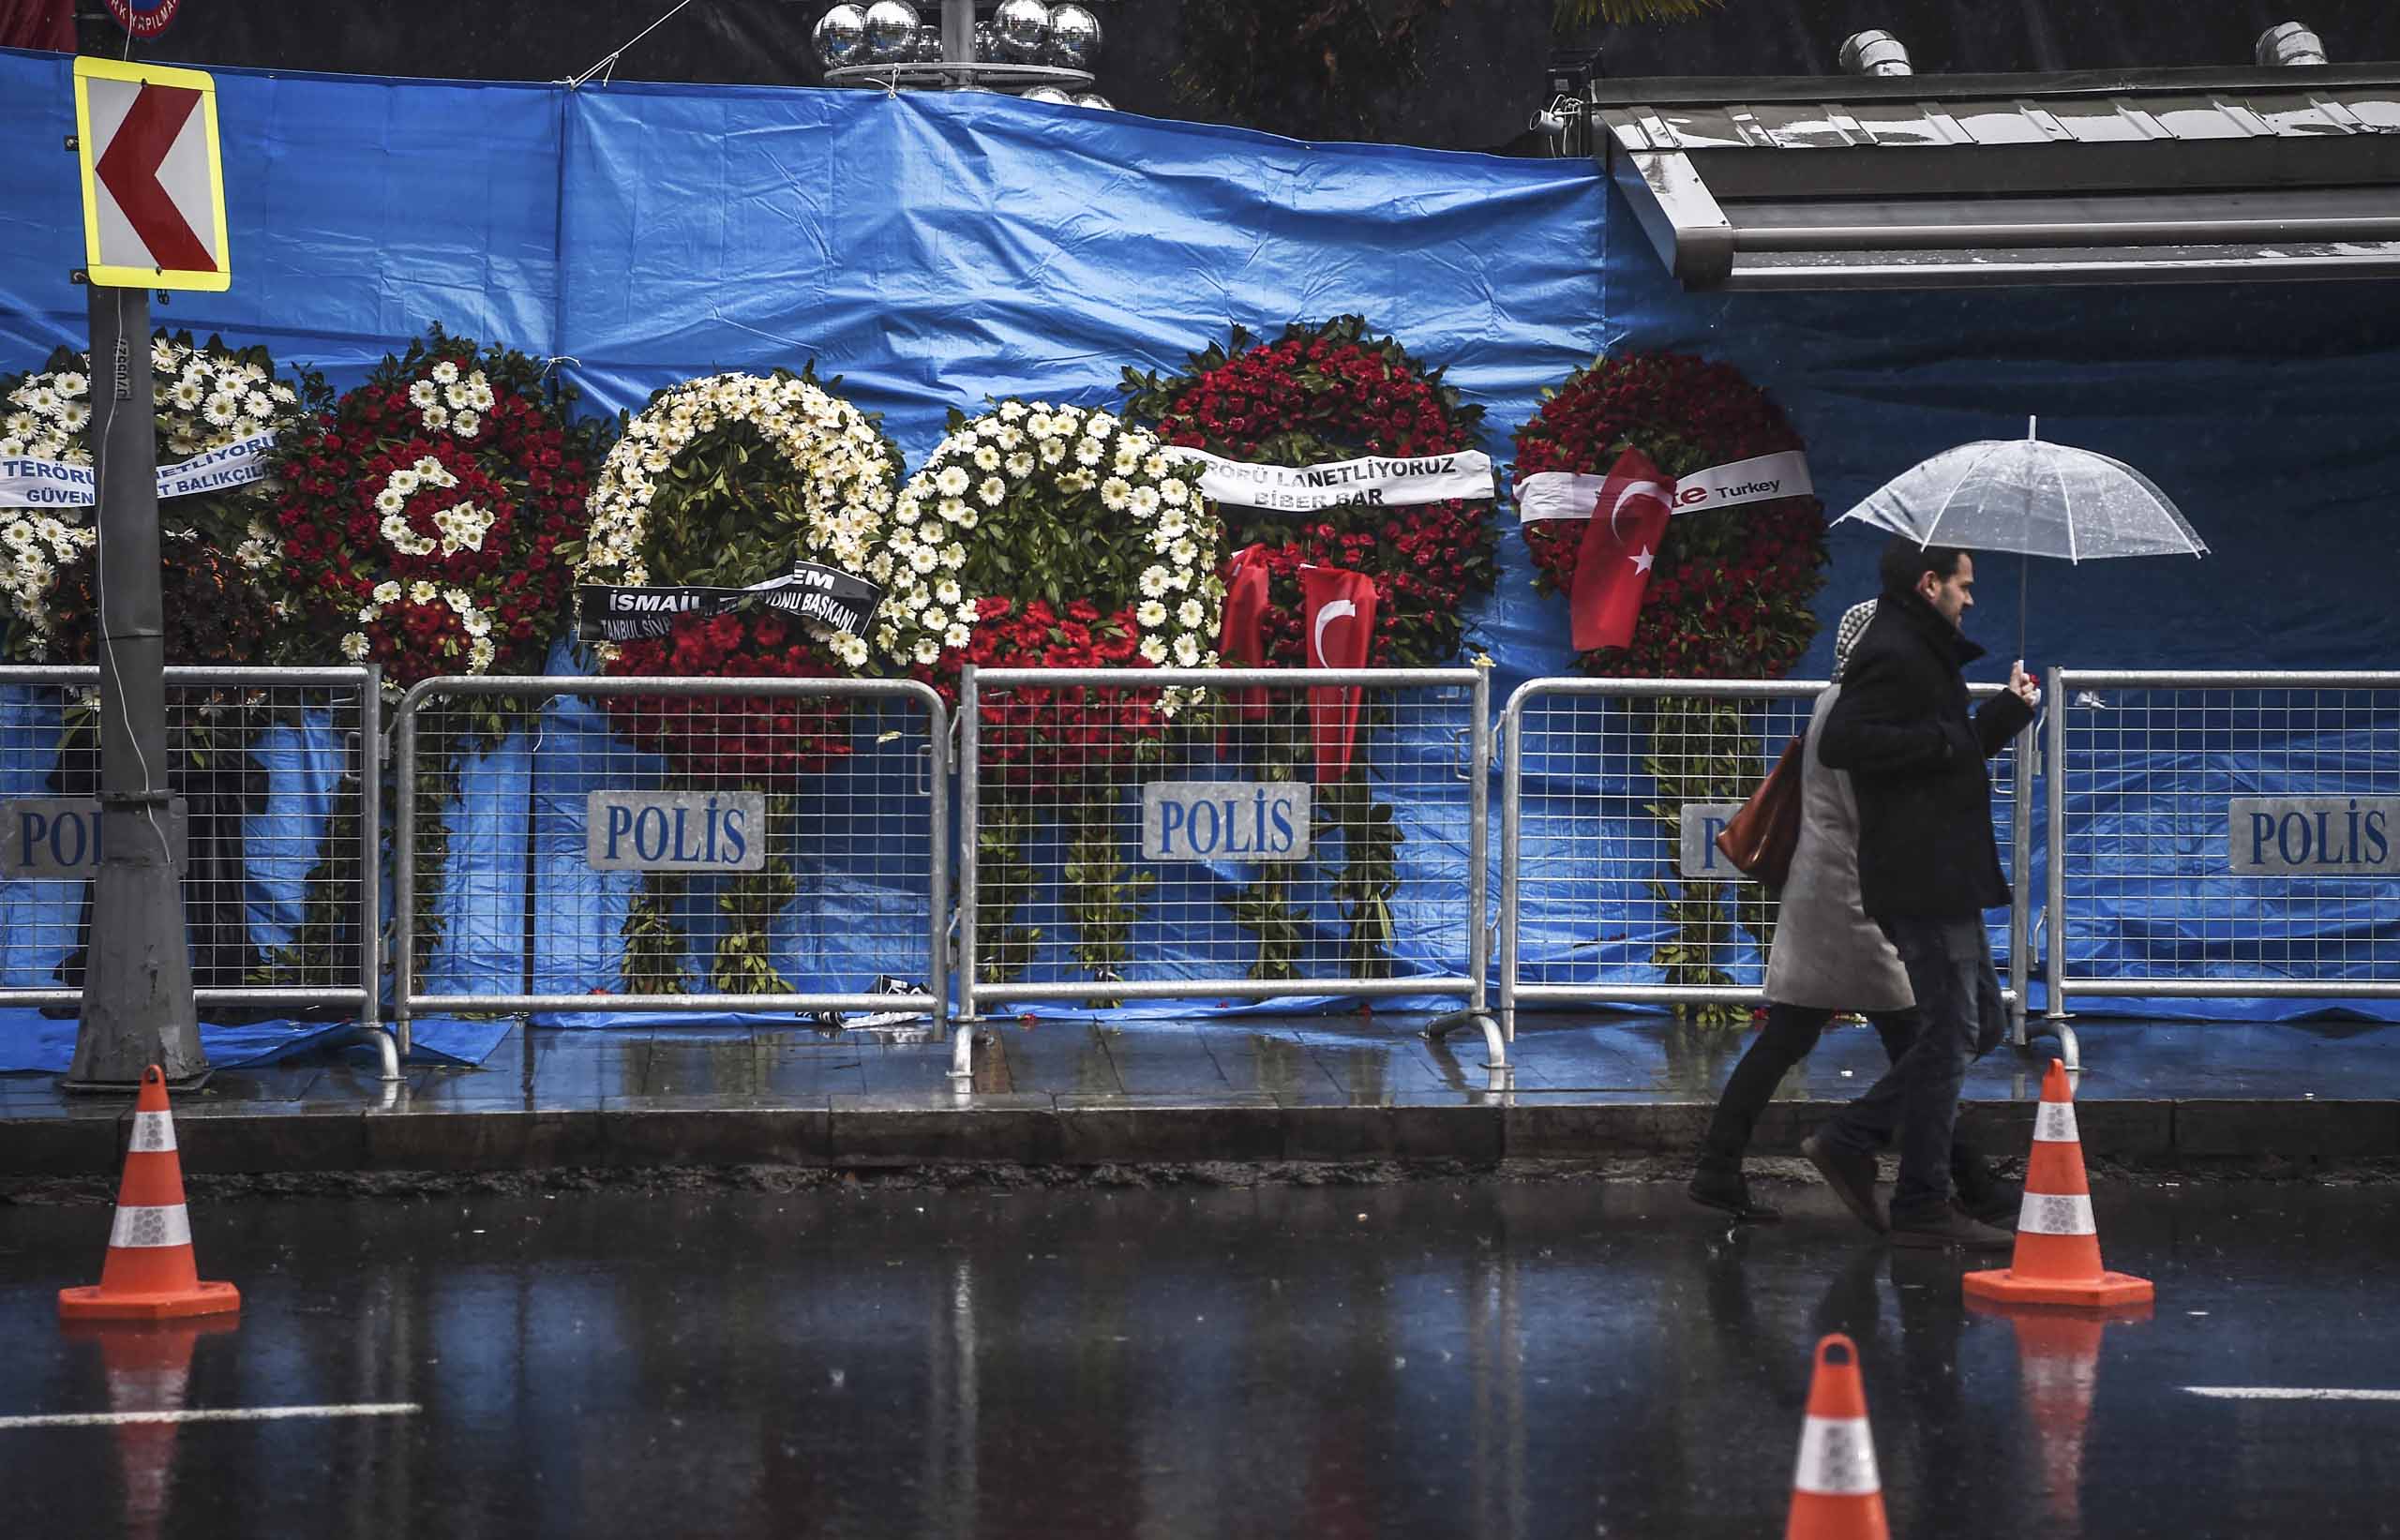 A couple walk past the Reina nightclub on January 5, 2017 in Istanbul, days after a gunman killed 39 people on New Year's night. 
                      The gunman who killed 39 people at an Istanbul nightclub had fought in Syria for Islamic State jihadists, a report said on January 3, as Turkish authorities intensified their hunt for the attacker. Of the 39 dead, 27 were foreigners, mainly from Arab countries, with coffins repatriated overnight to countries including Lebanon and Saudi Arabia. / AFP / OZAN KOSE        (Photo credit should read OZAN KOSE/AFP/Getty Images) (OZAN KOSE&mdash;AFP/Getty Images)